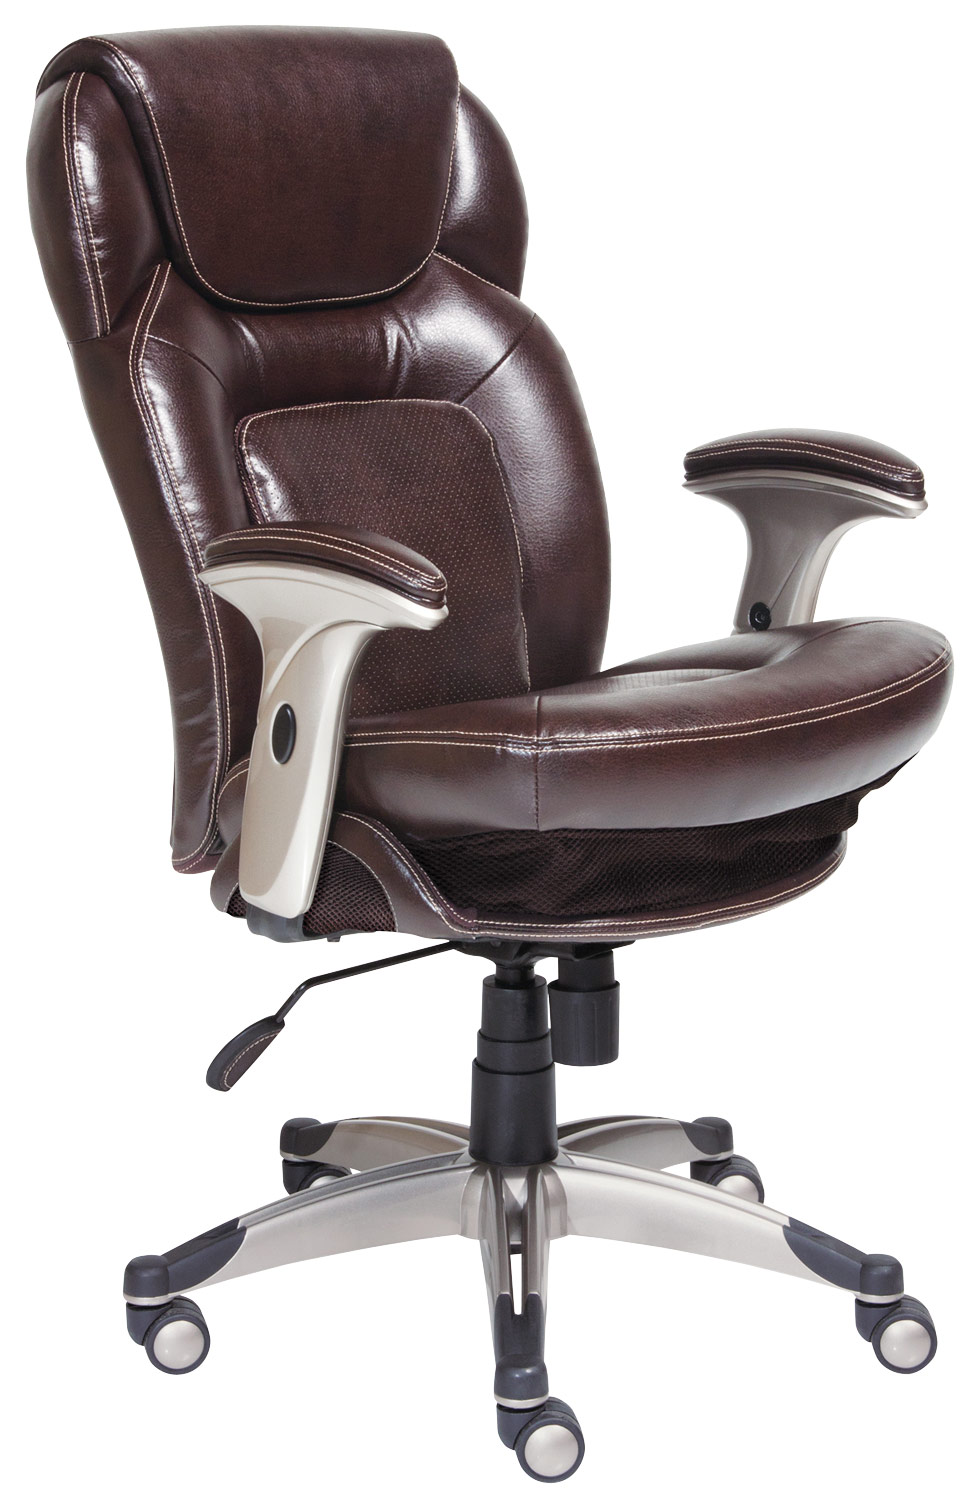 Angle View: Serta - Executive Office Chair - Black